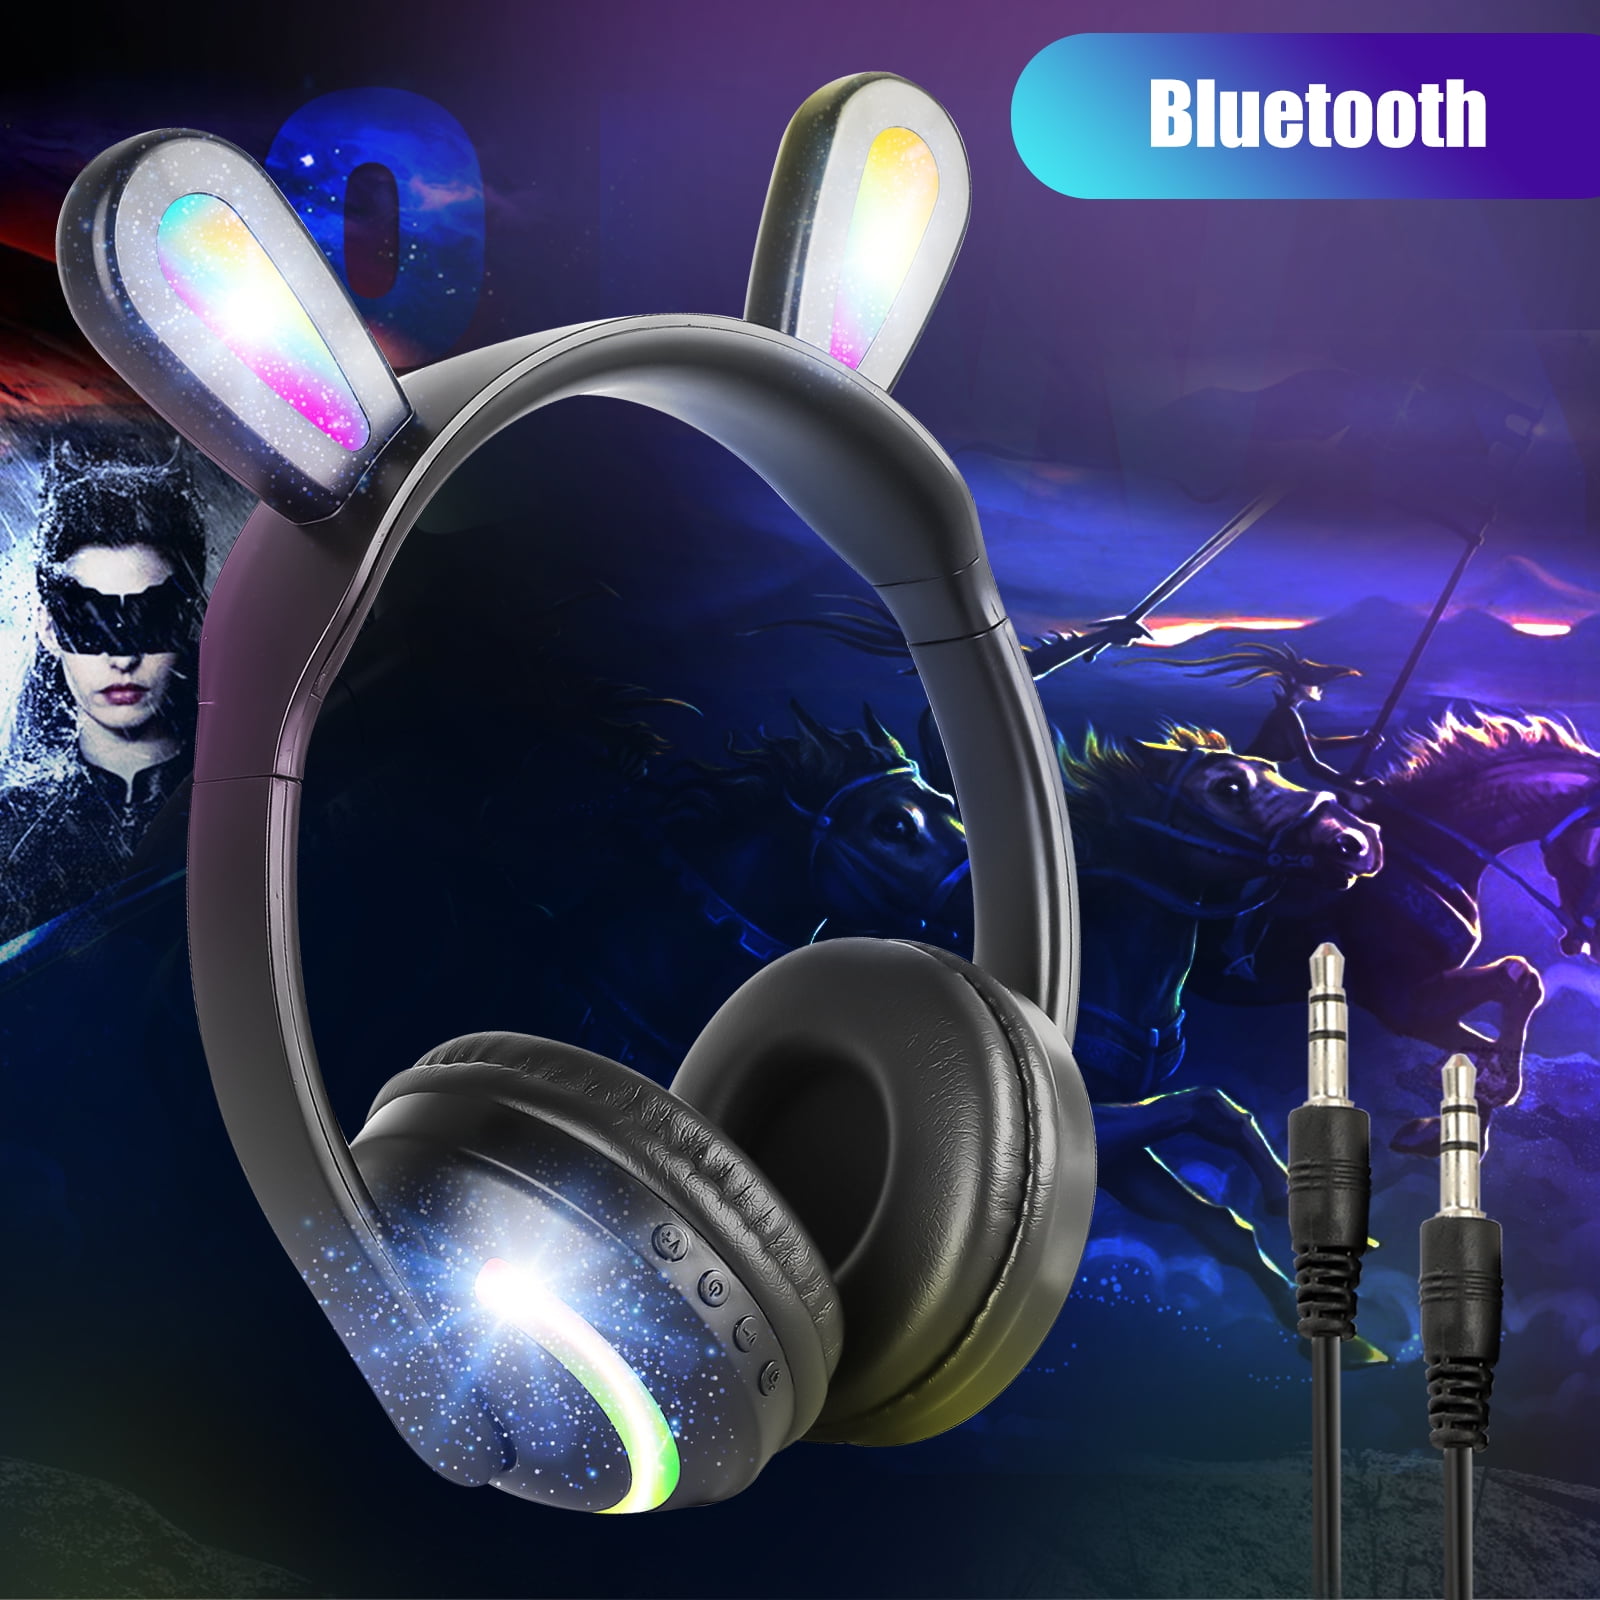 EEEKit Wireless Headphones Bluetooth LED Light Up 7 Color Blinking Cat Ear Over Ear/On Ear Safe Foldable Headset Stereo with Microphone for iPhone/iPad/Smartphones/Laptop/PC/TV Kids Adults